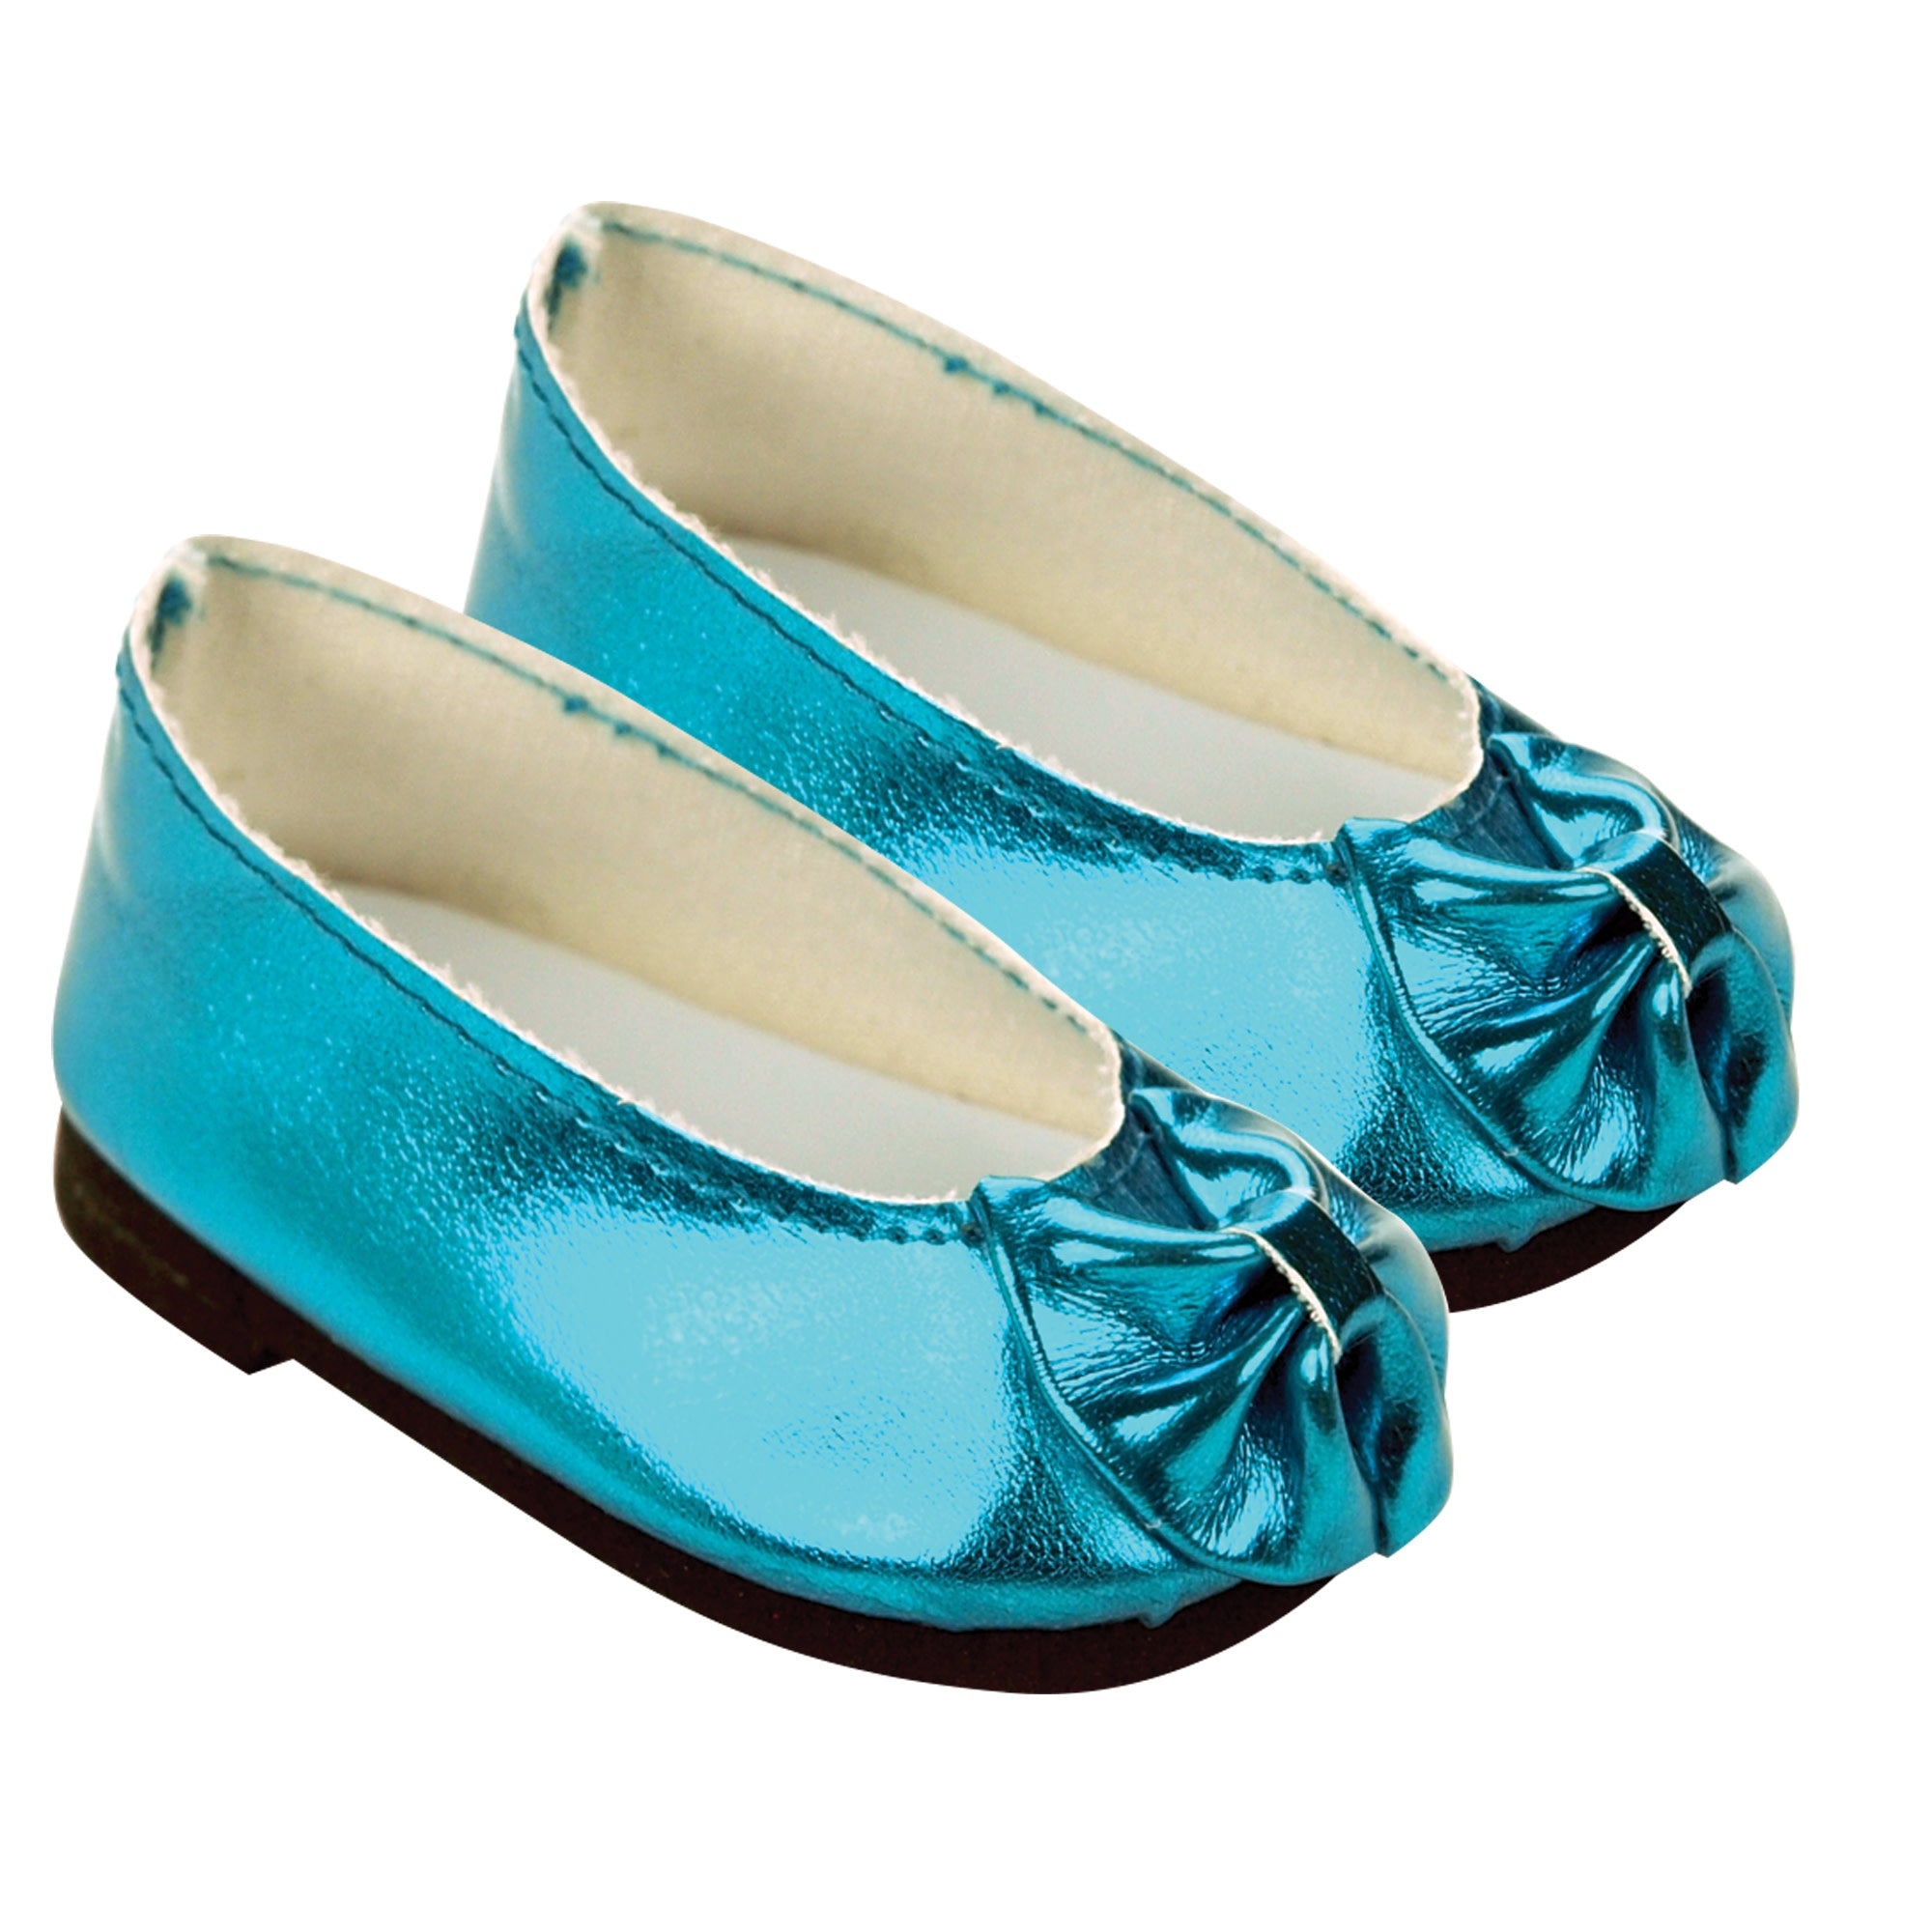 Sophia’s Super Cute Mix & Match Metallic Accessory Slip-On Ballerina Ballet Patent Bow Flat Shoes for 18” Dolls, Teal